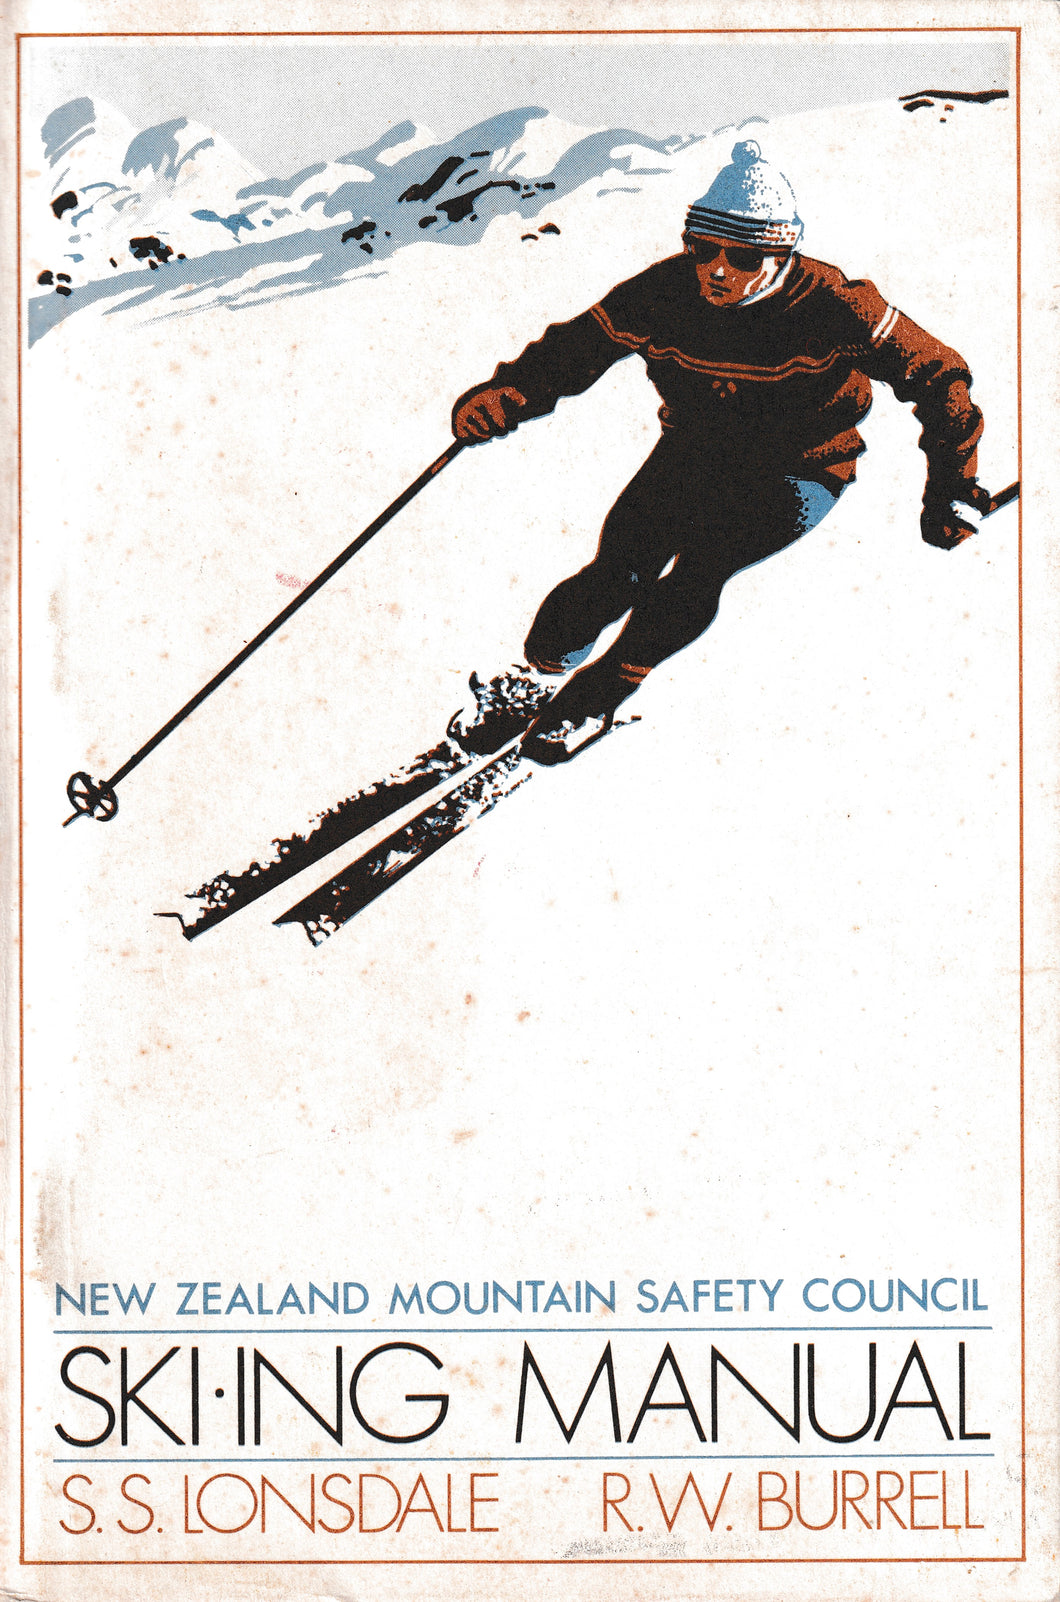 Skiing Manual | S.S Lonsdale & R.W. Burreall